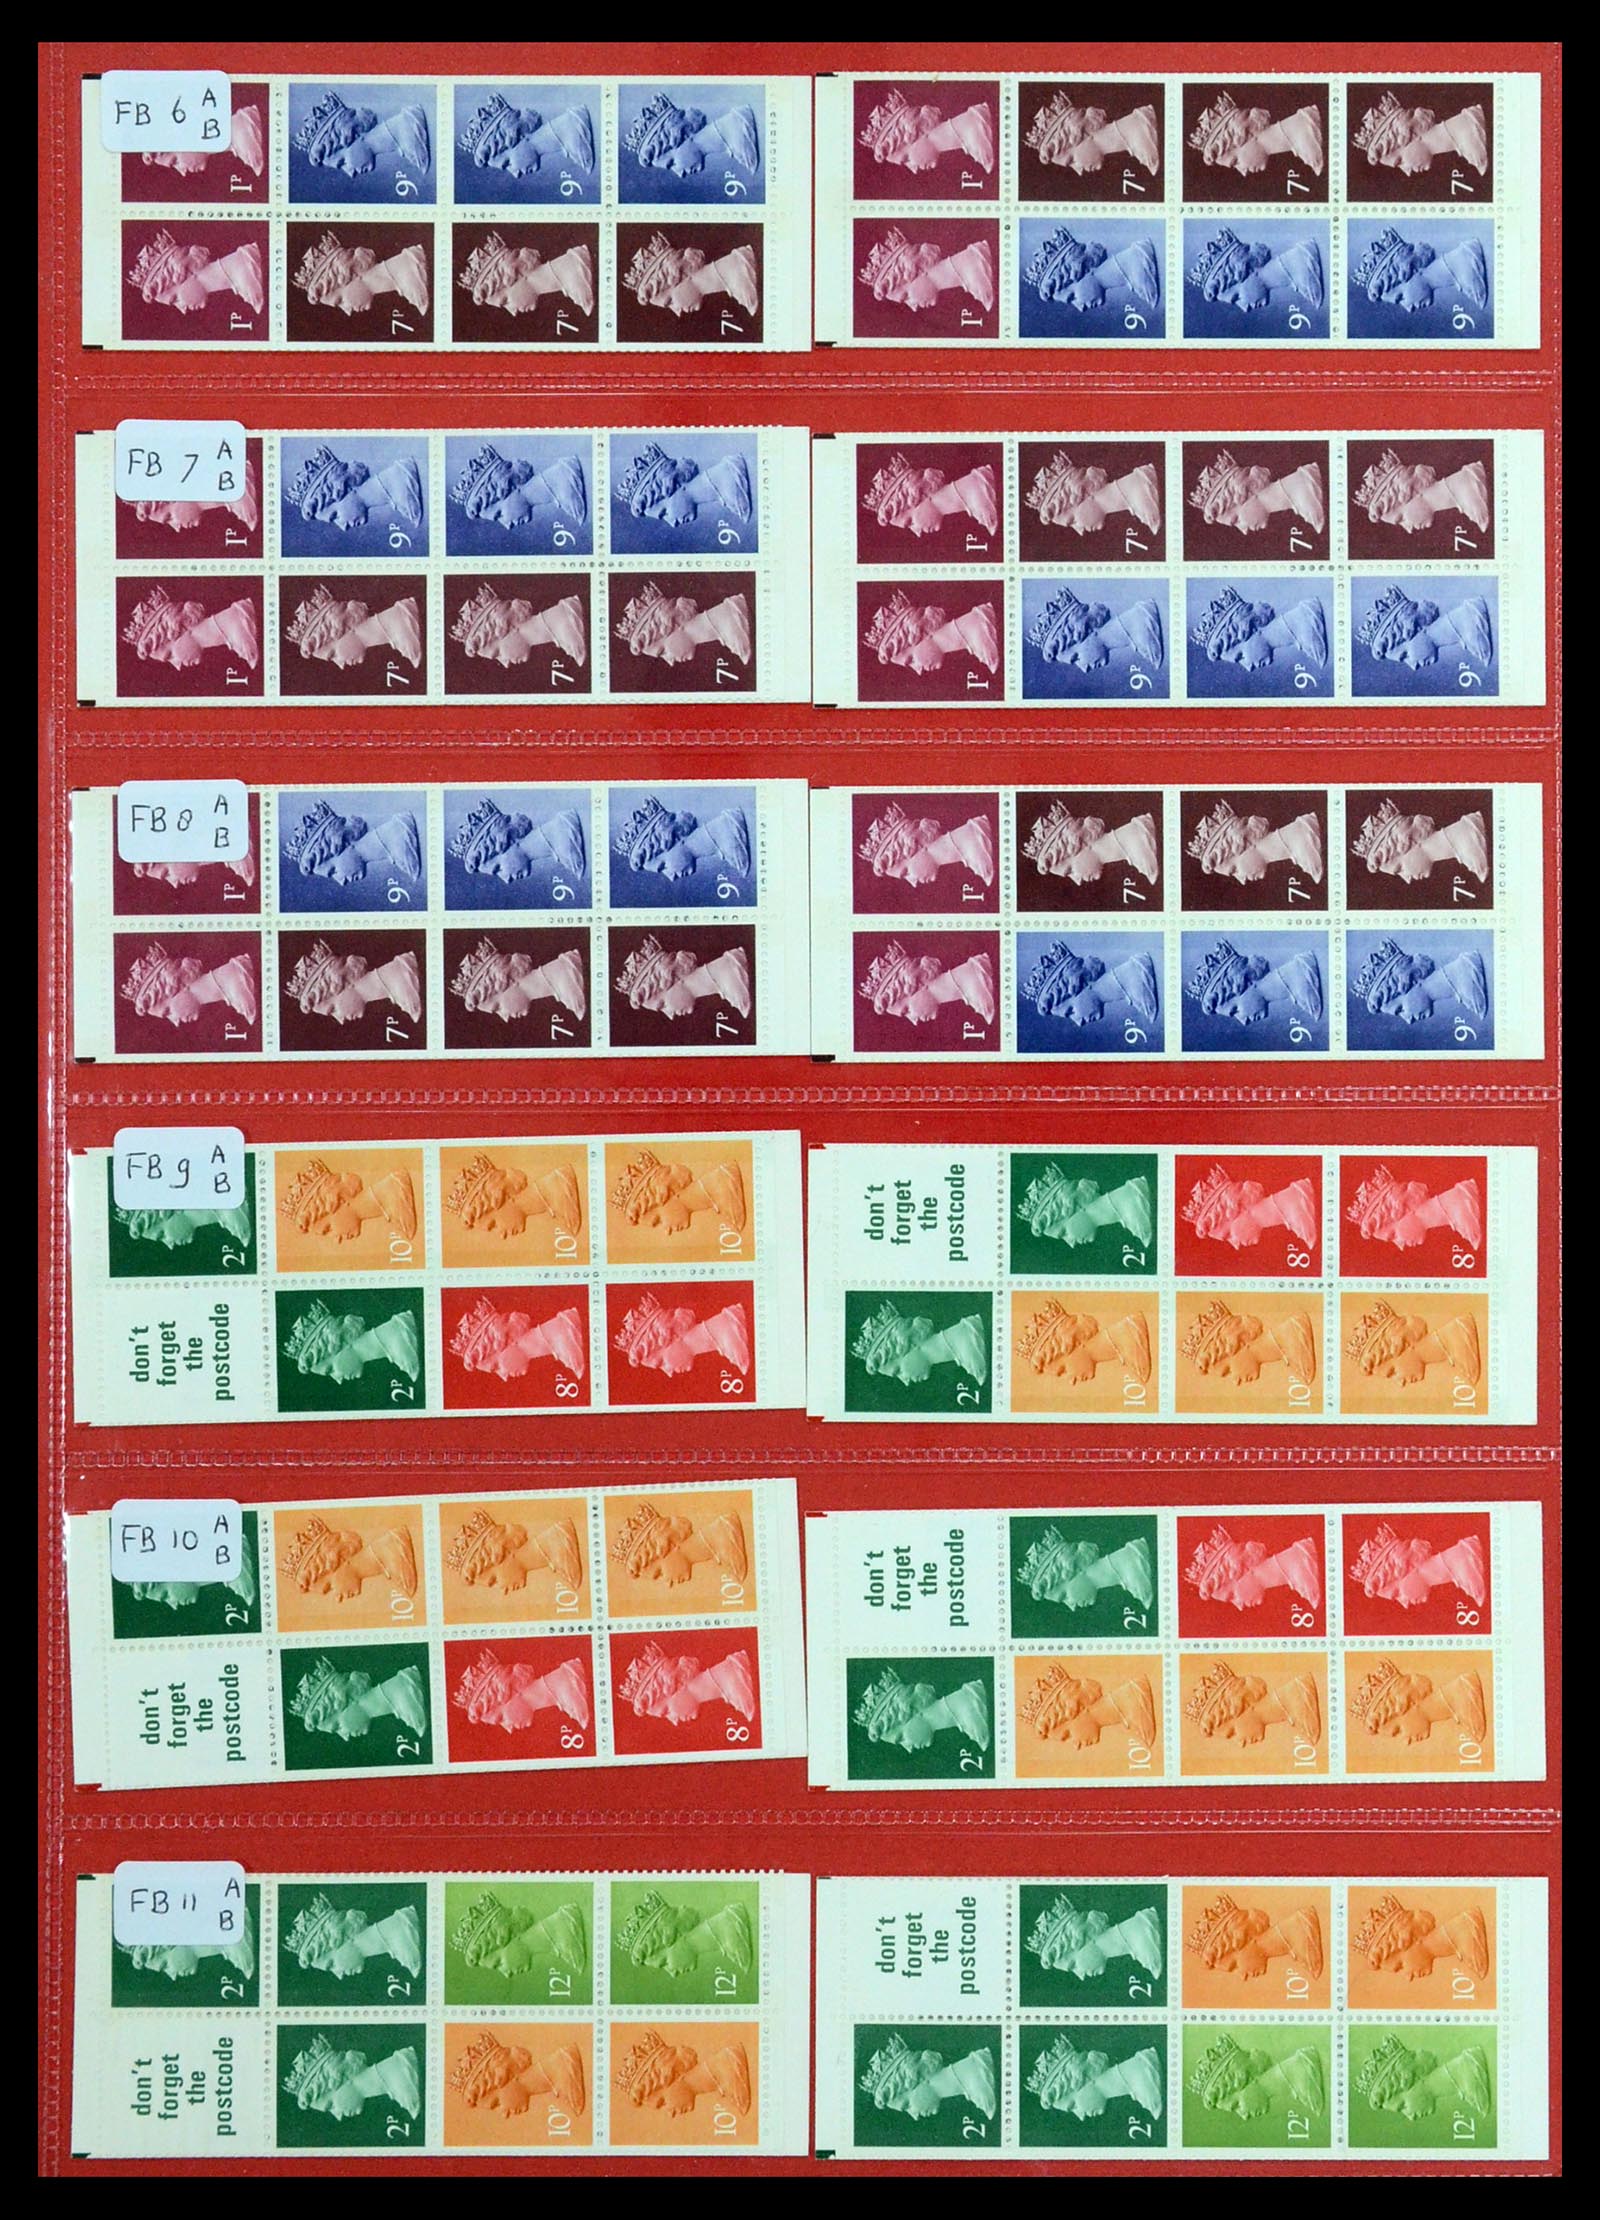 36368 003 - Stamp collection 36368 Great Britain stamp booklets 1976-2000.